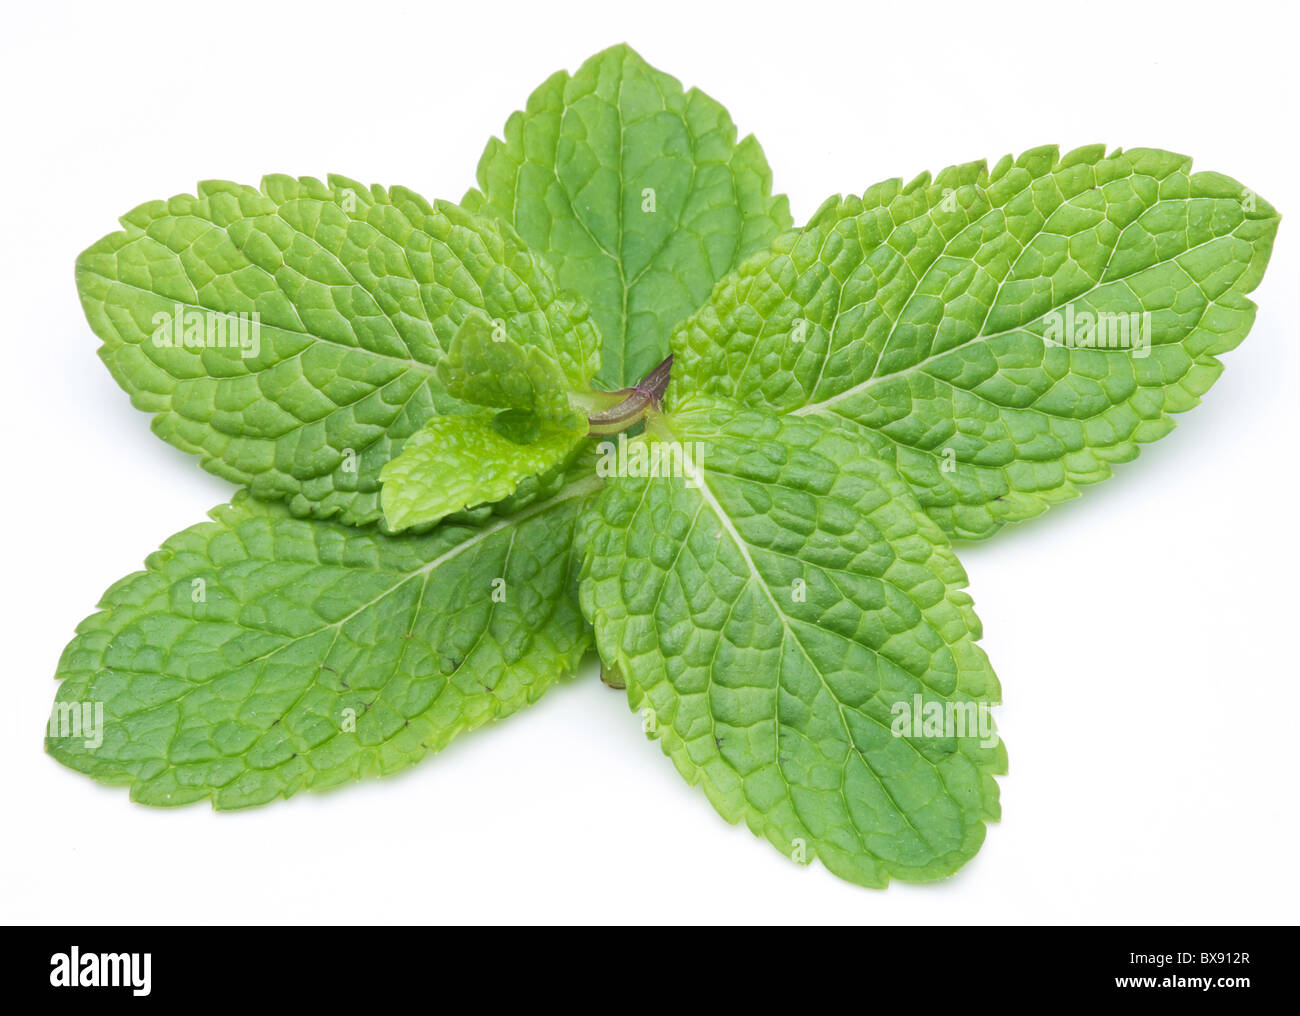 Mint leaves on a white background Stock Photo